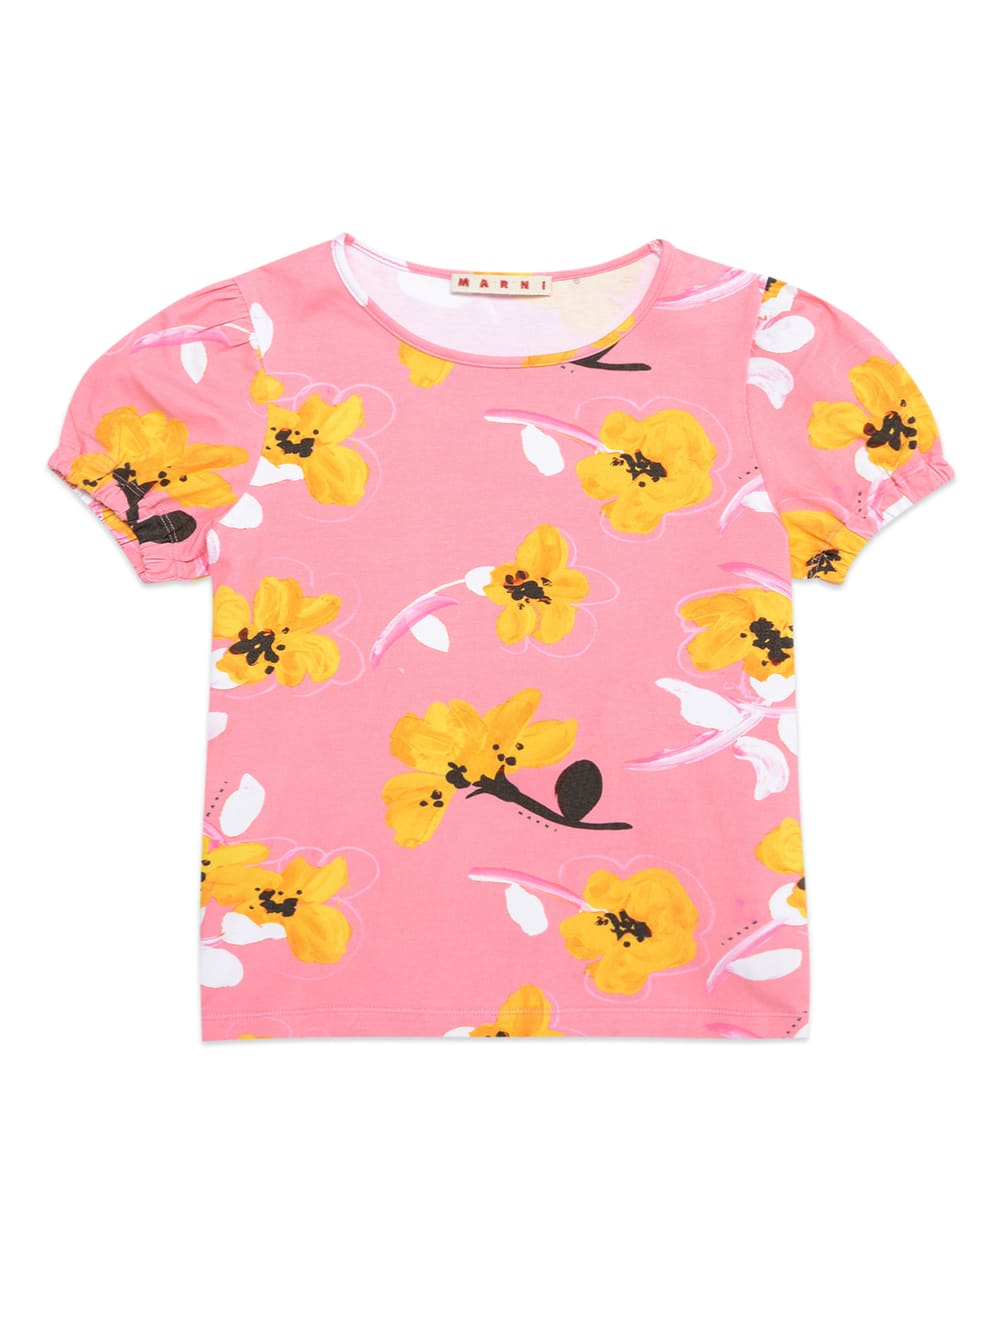 Marni Kids Girls Pink Cotton T-shirt With Floral Print